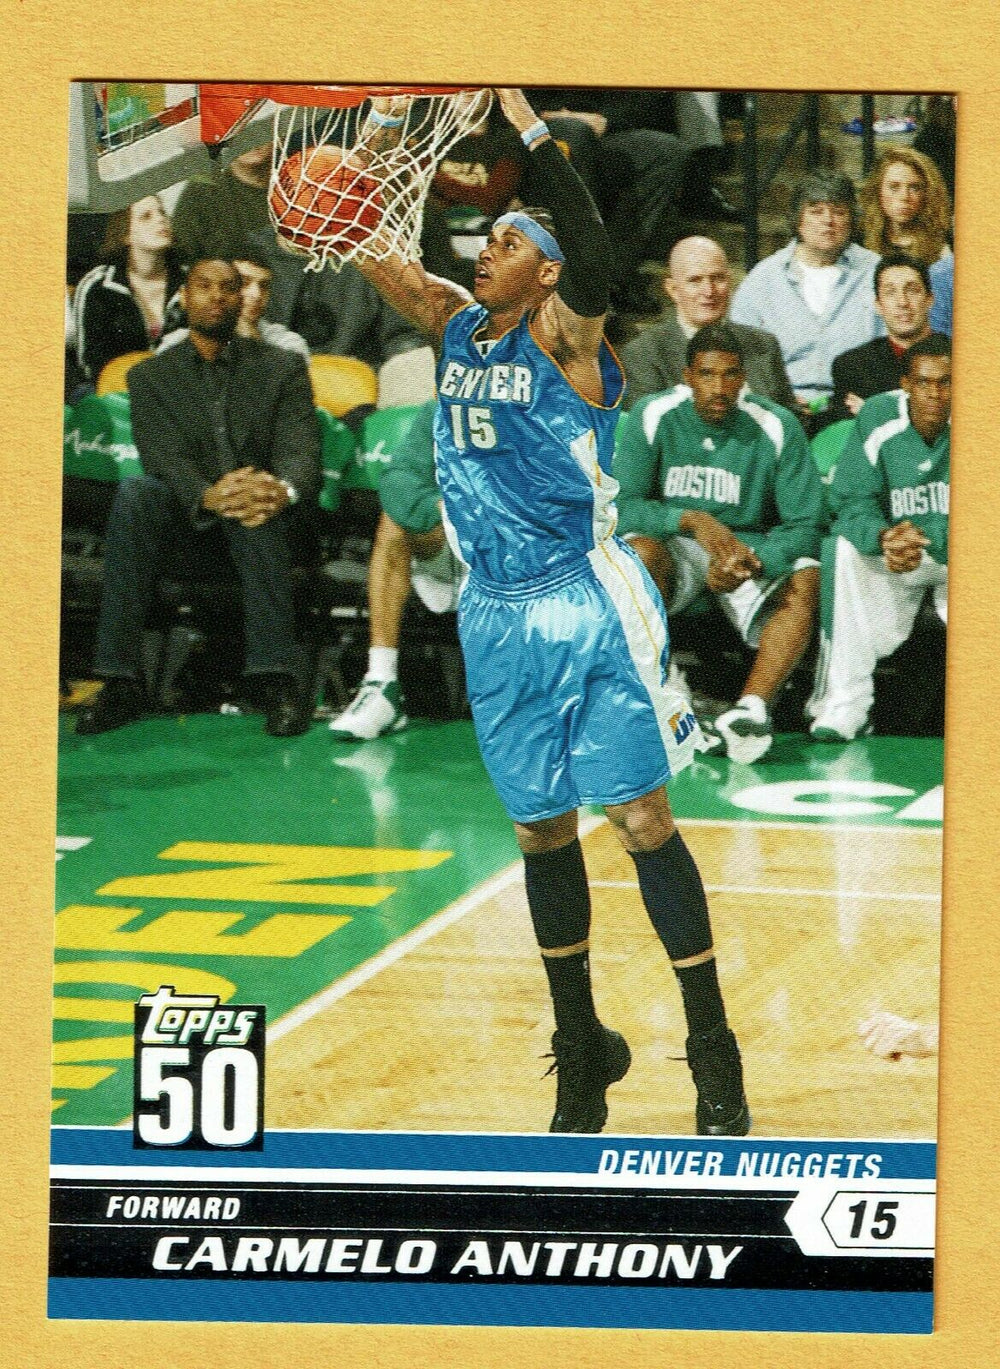 Carmelo Anthony 2007 2008 Topps 50th Anniversary Series Mint Card #7